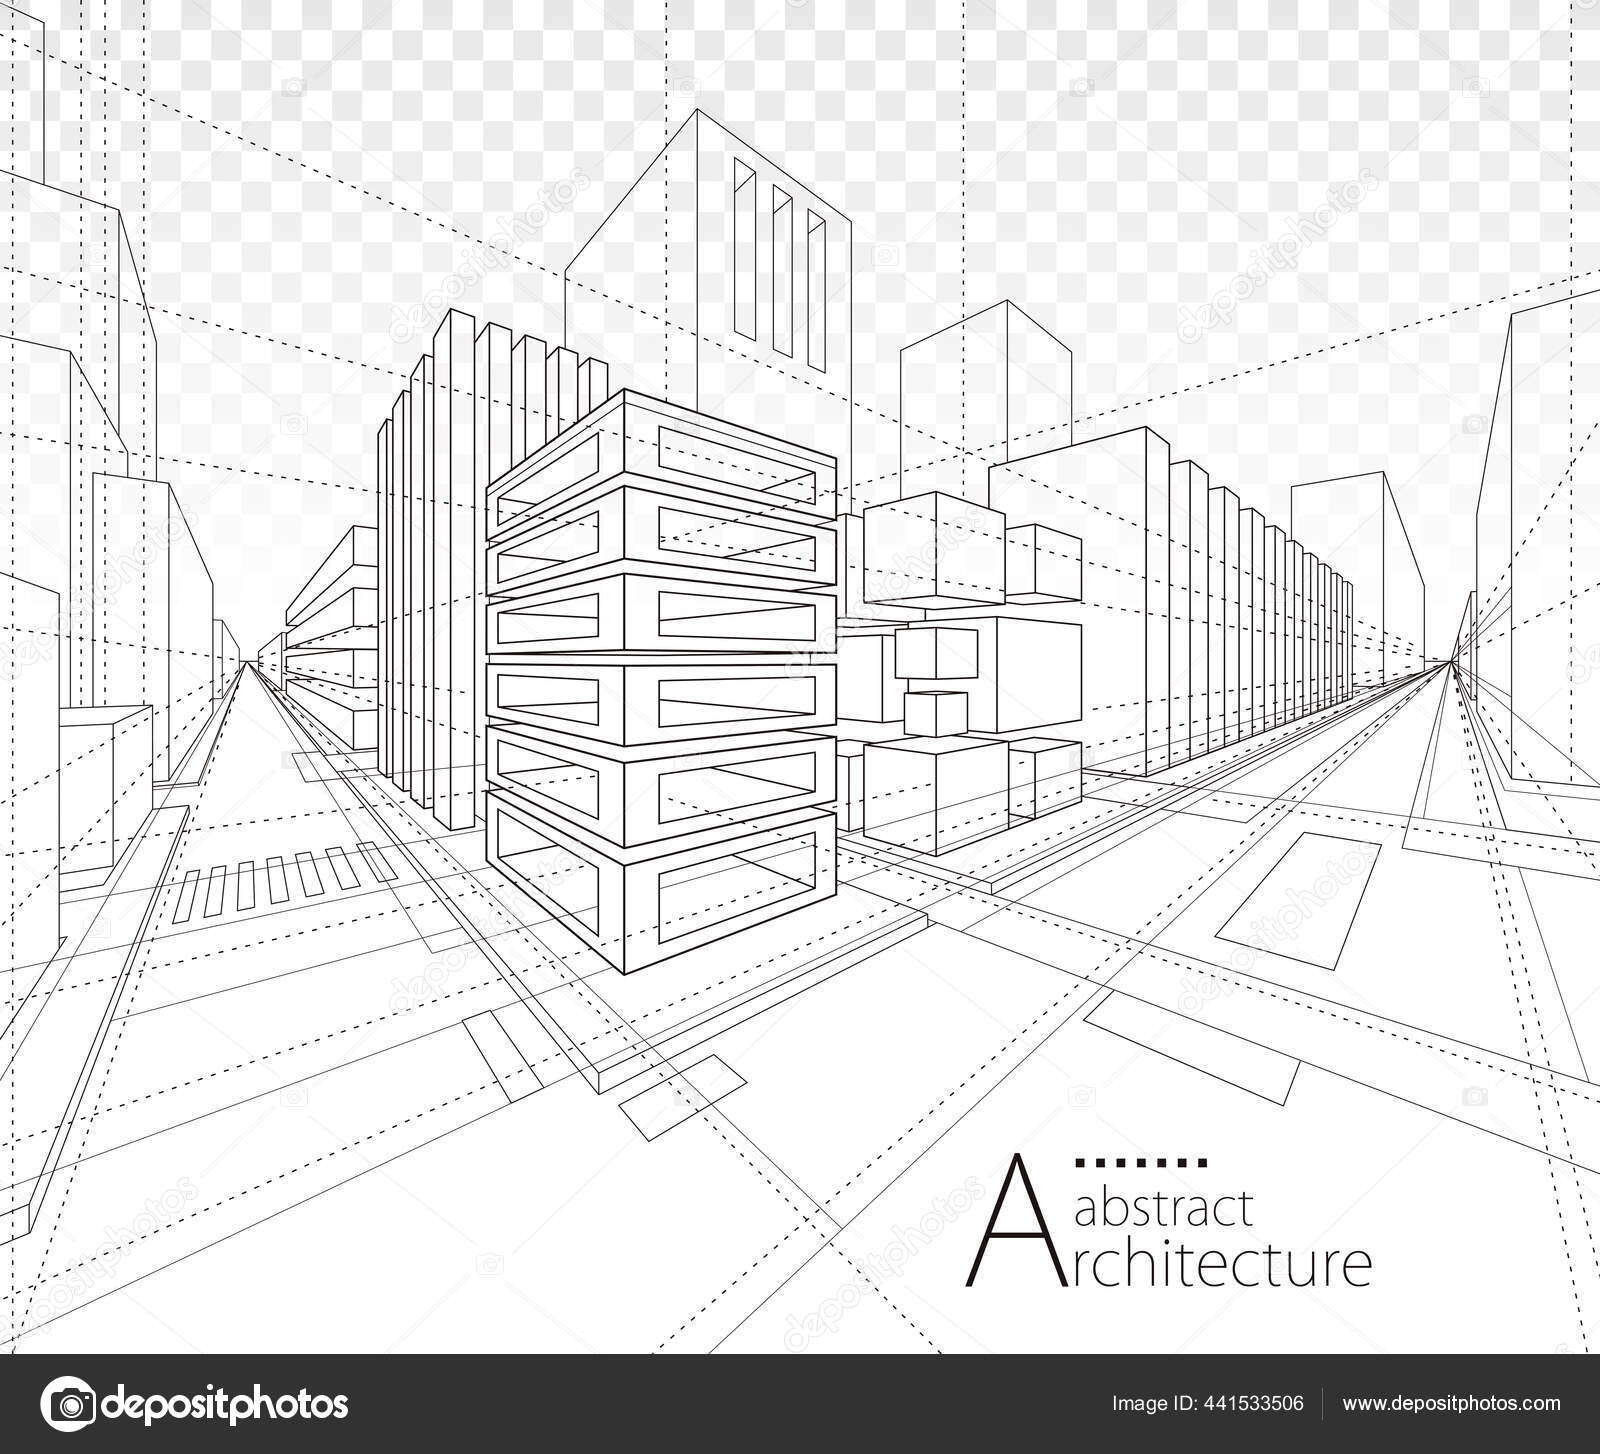 10 Drawings of the World's Most Iconic Modernist Architecture - Architizer  Journal